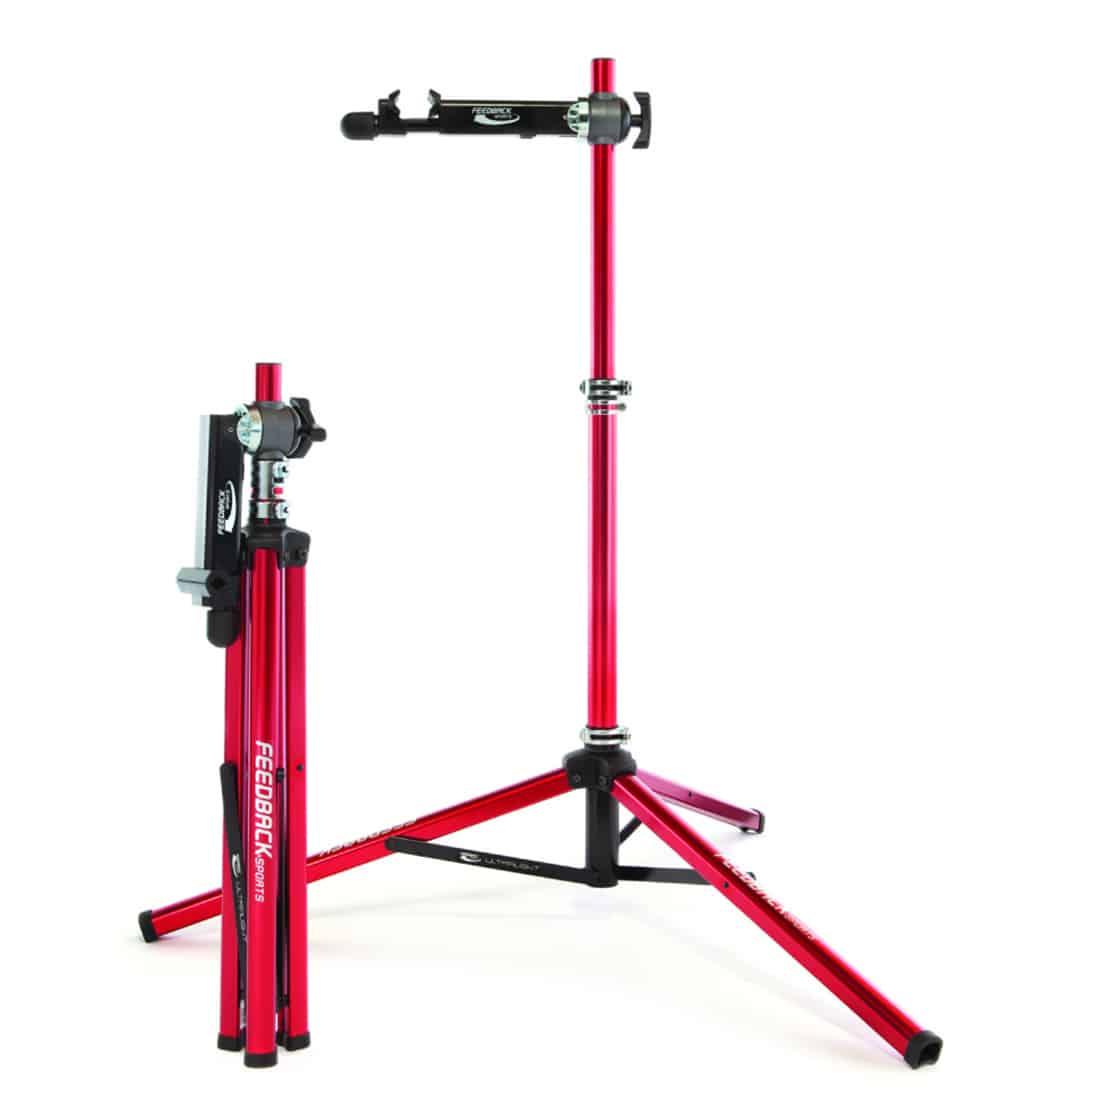 feedback ultralight bike repair stand open and set up next to another feedback ultralight bike repair stand folded up into it's most compact form